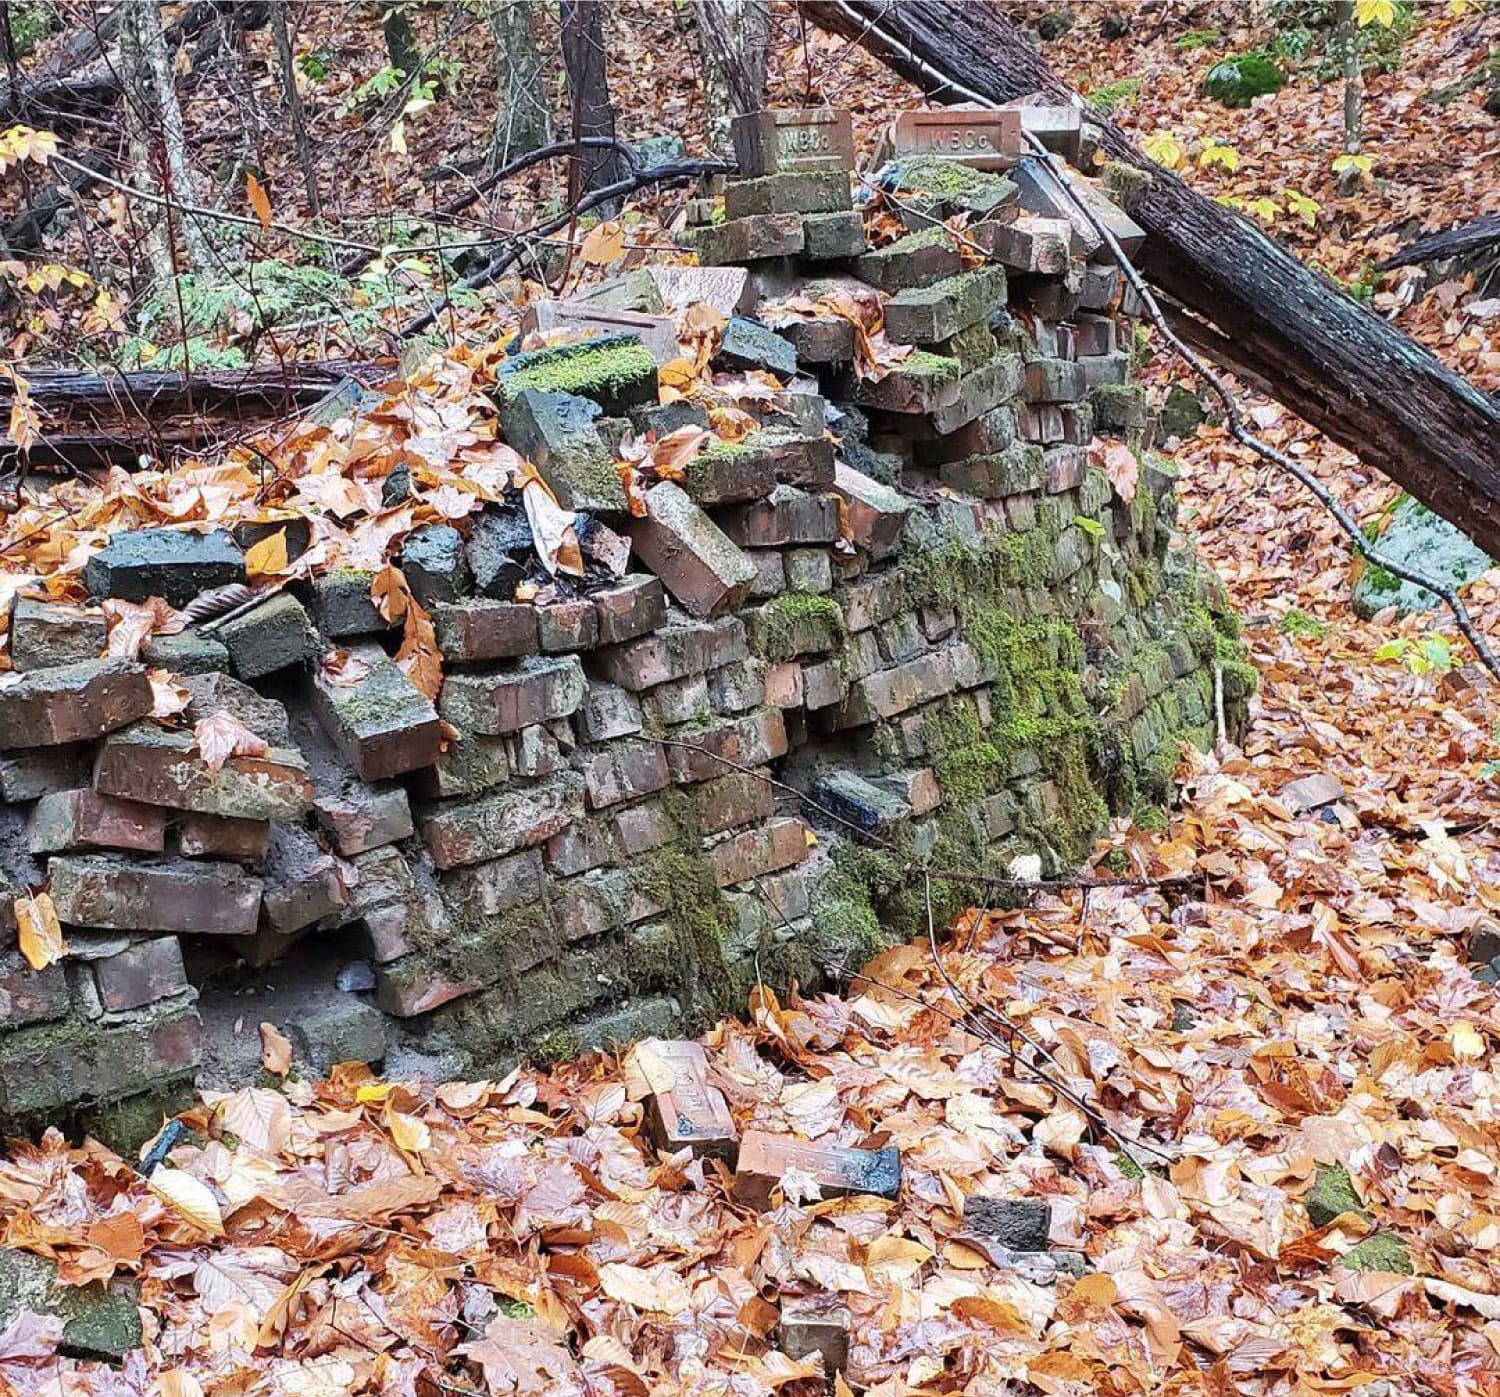 Remnants of a beehive charcoal kiln